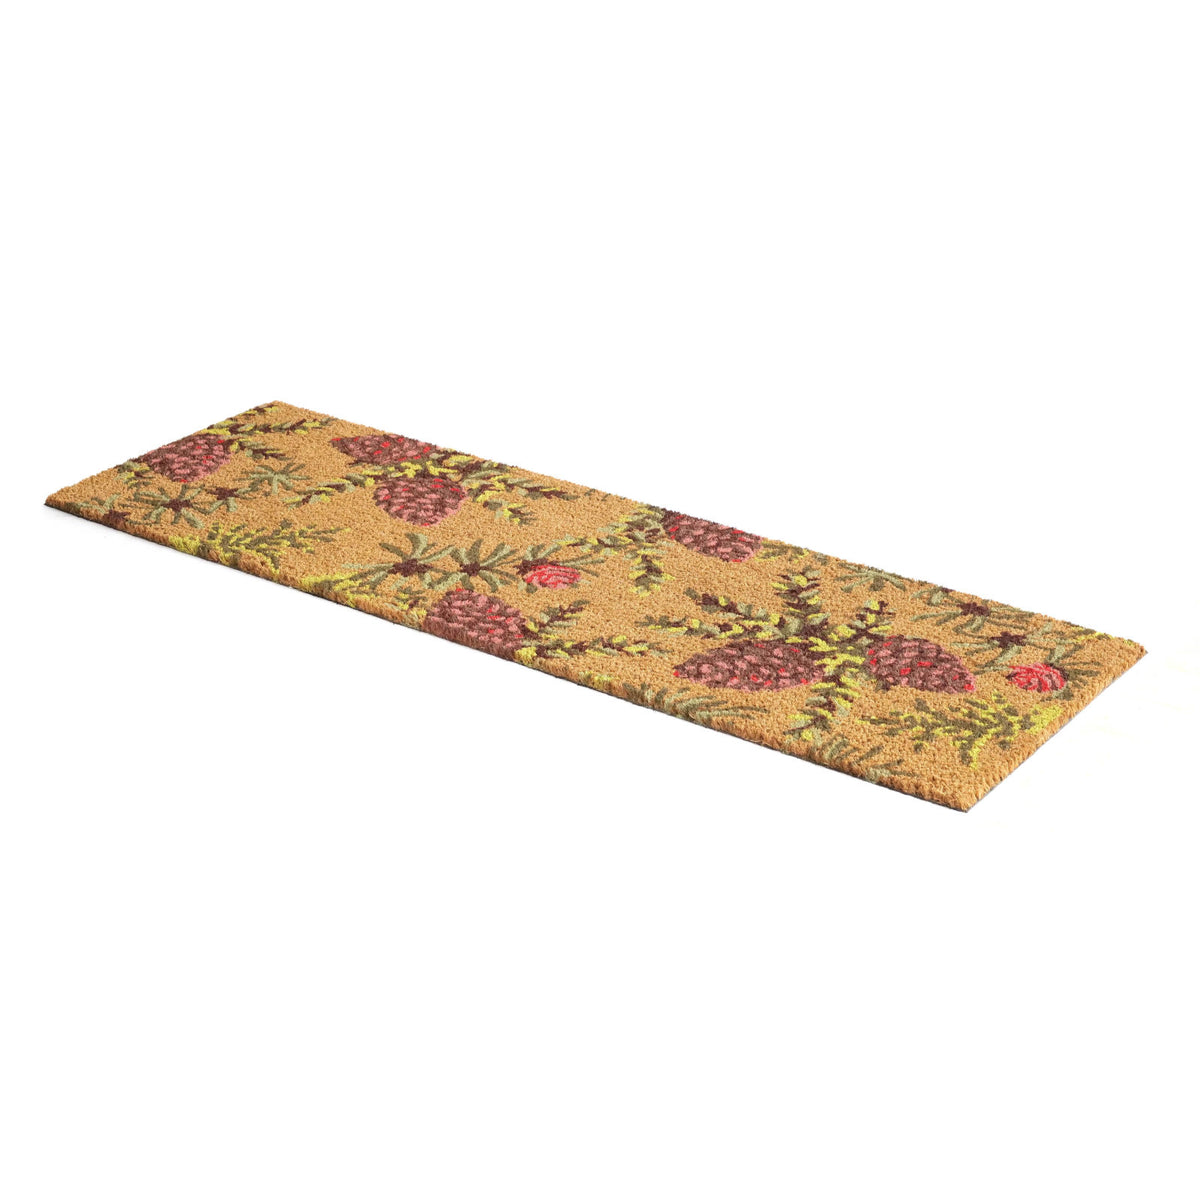 Charming Floral Pinecone Doormat - Natural Coir, Indoor & Outdoor Use, Durable PVC Backing